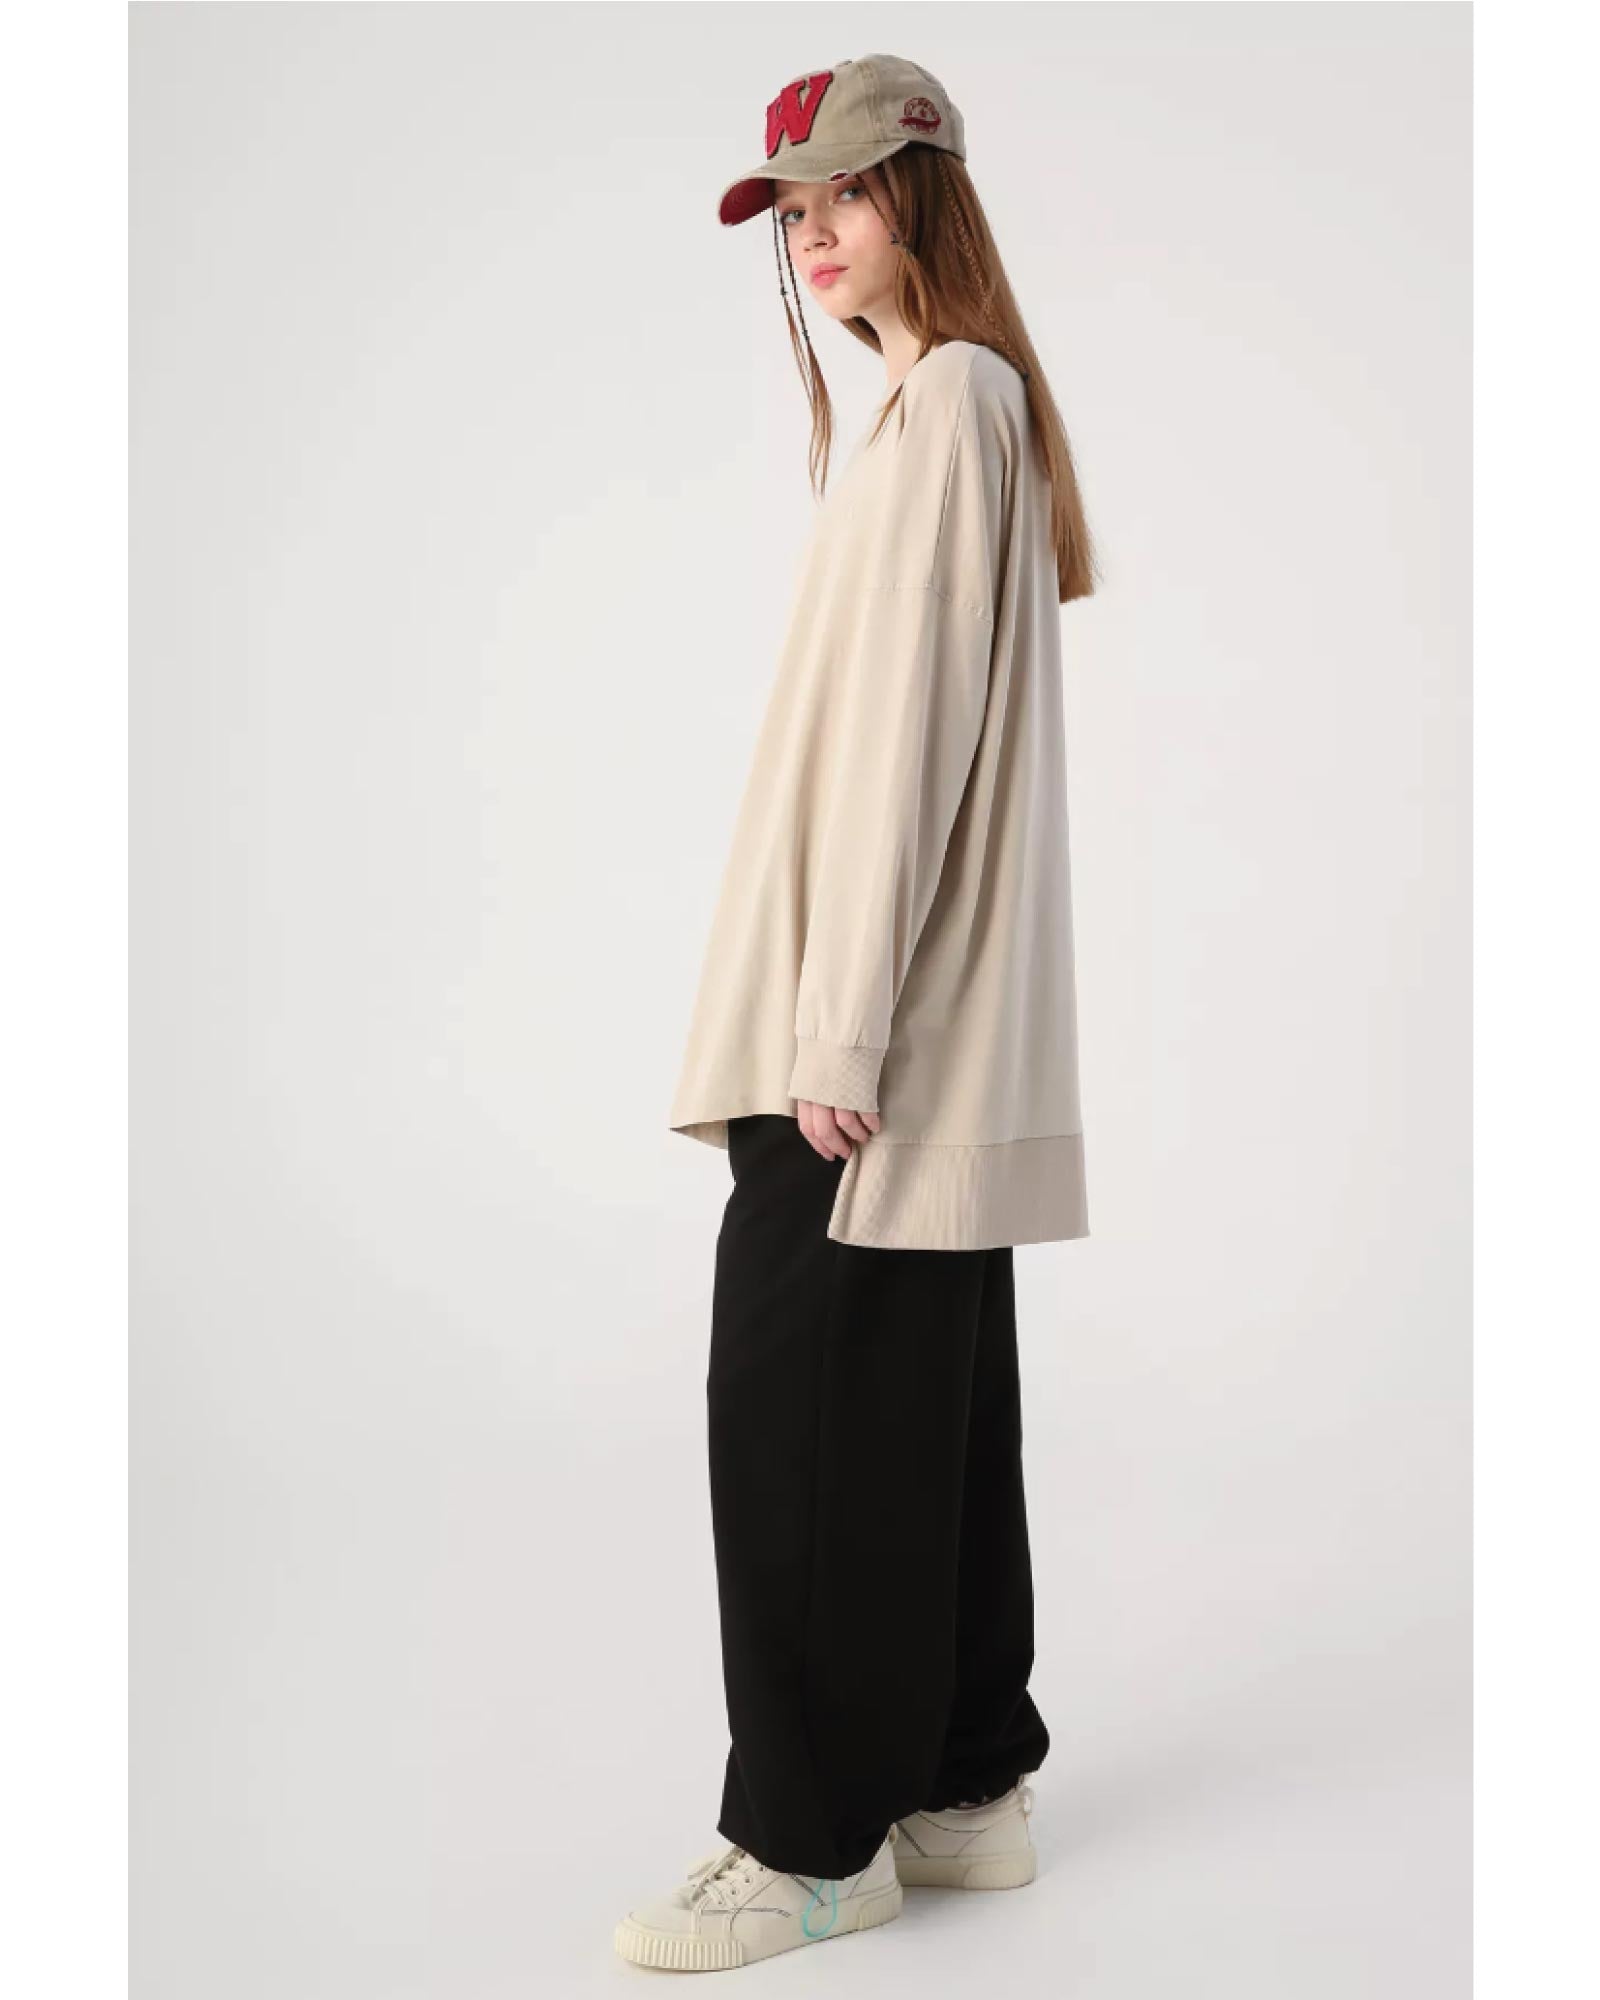 Crew neck hijab sweatshirt with ribbed cuffs and drop tail